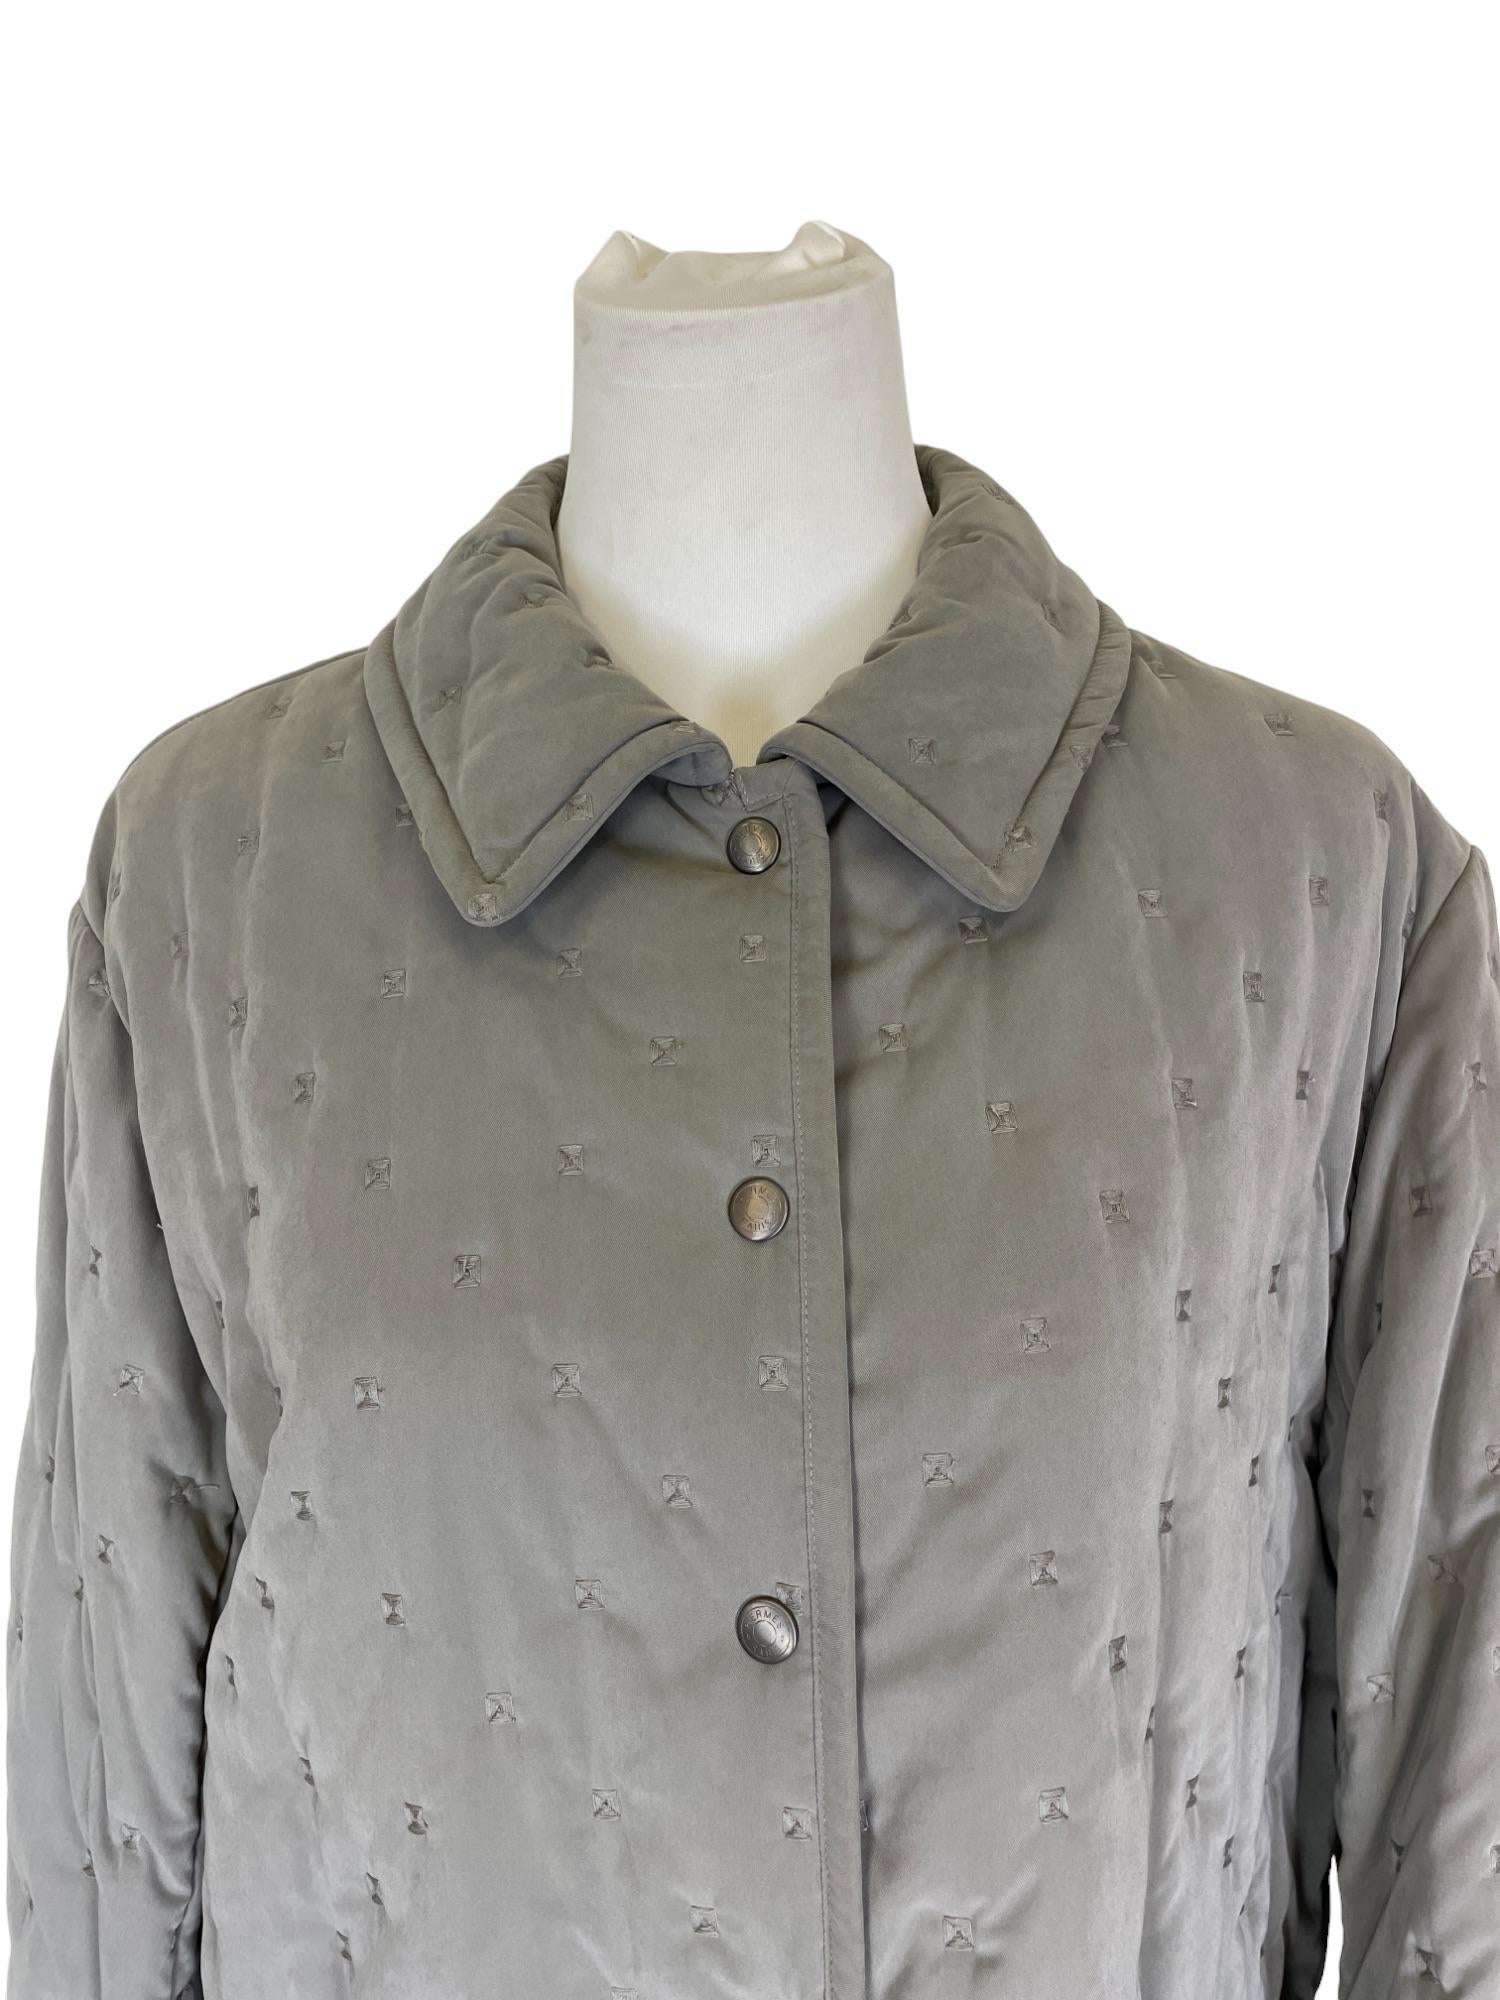 Rare Hermes Martin Margiela Jacket 
1990s 
-
NO RETURNS 
If you need more information, please contact us!